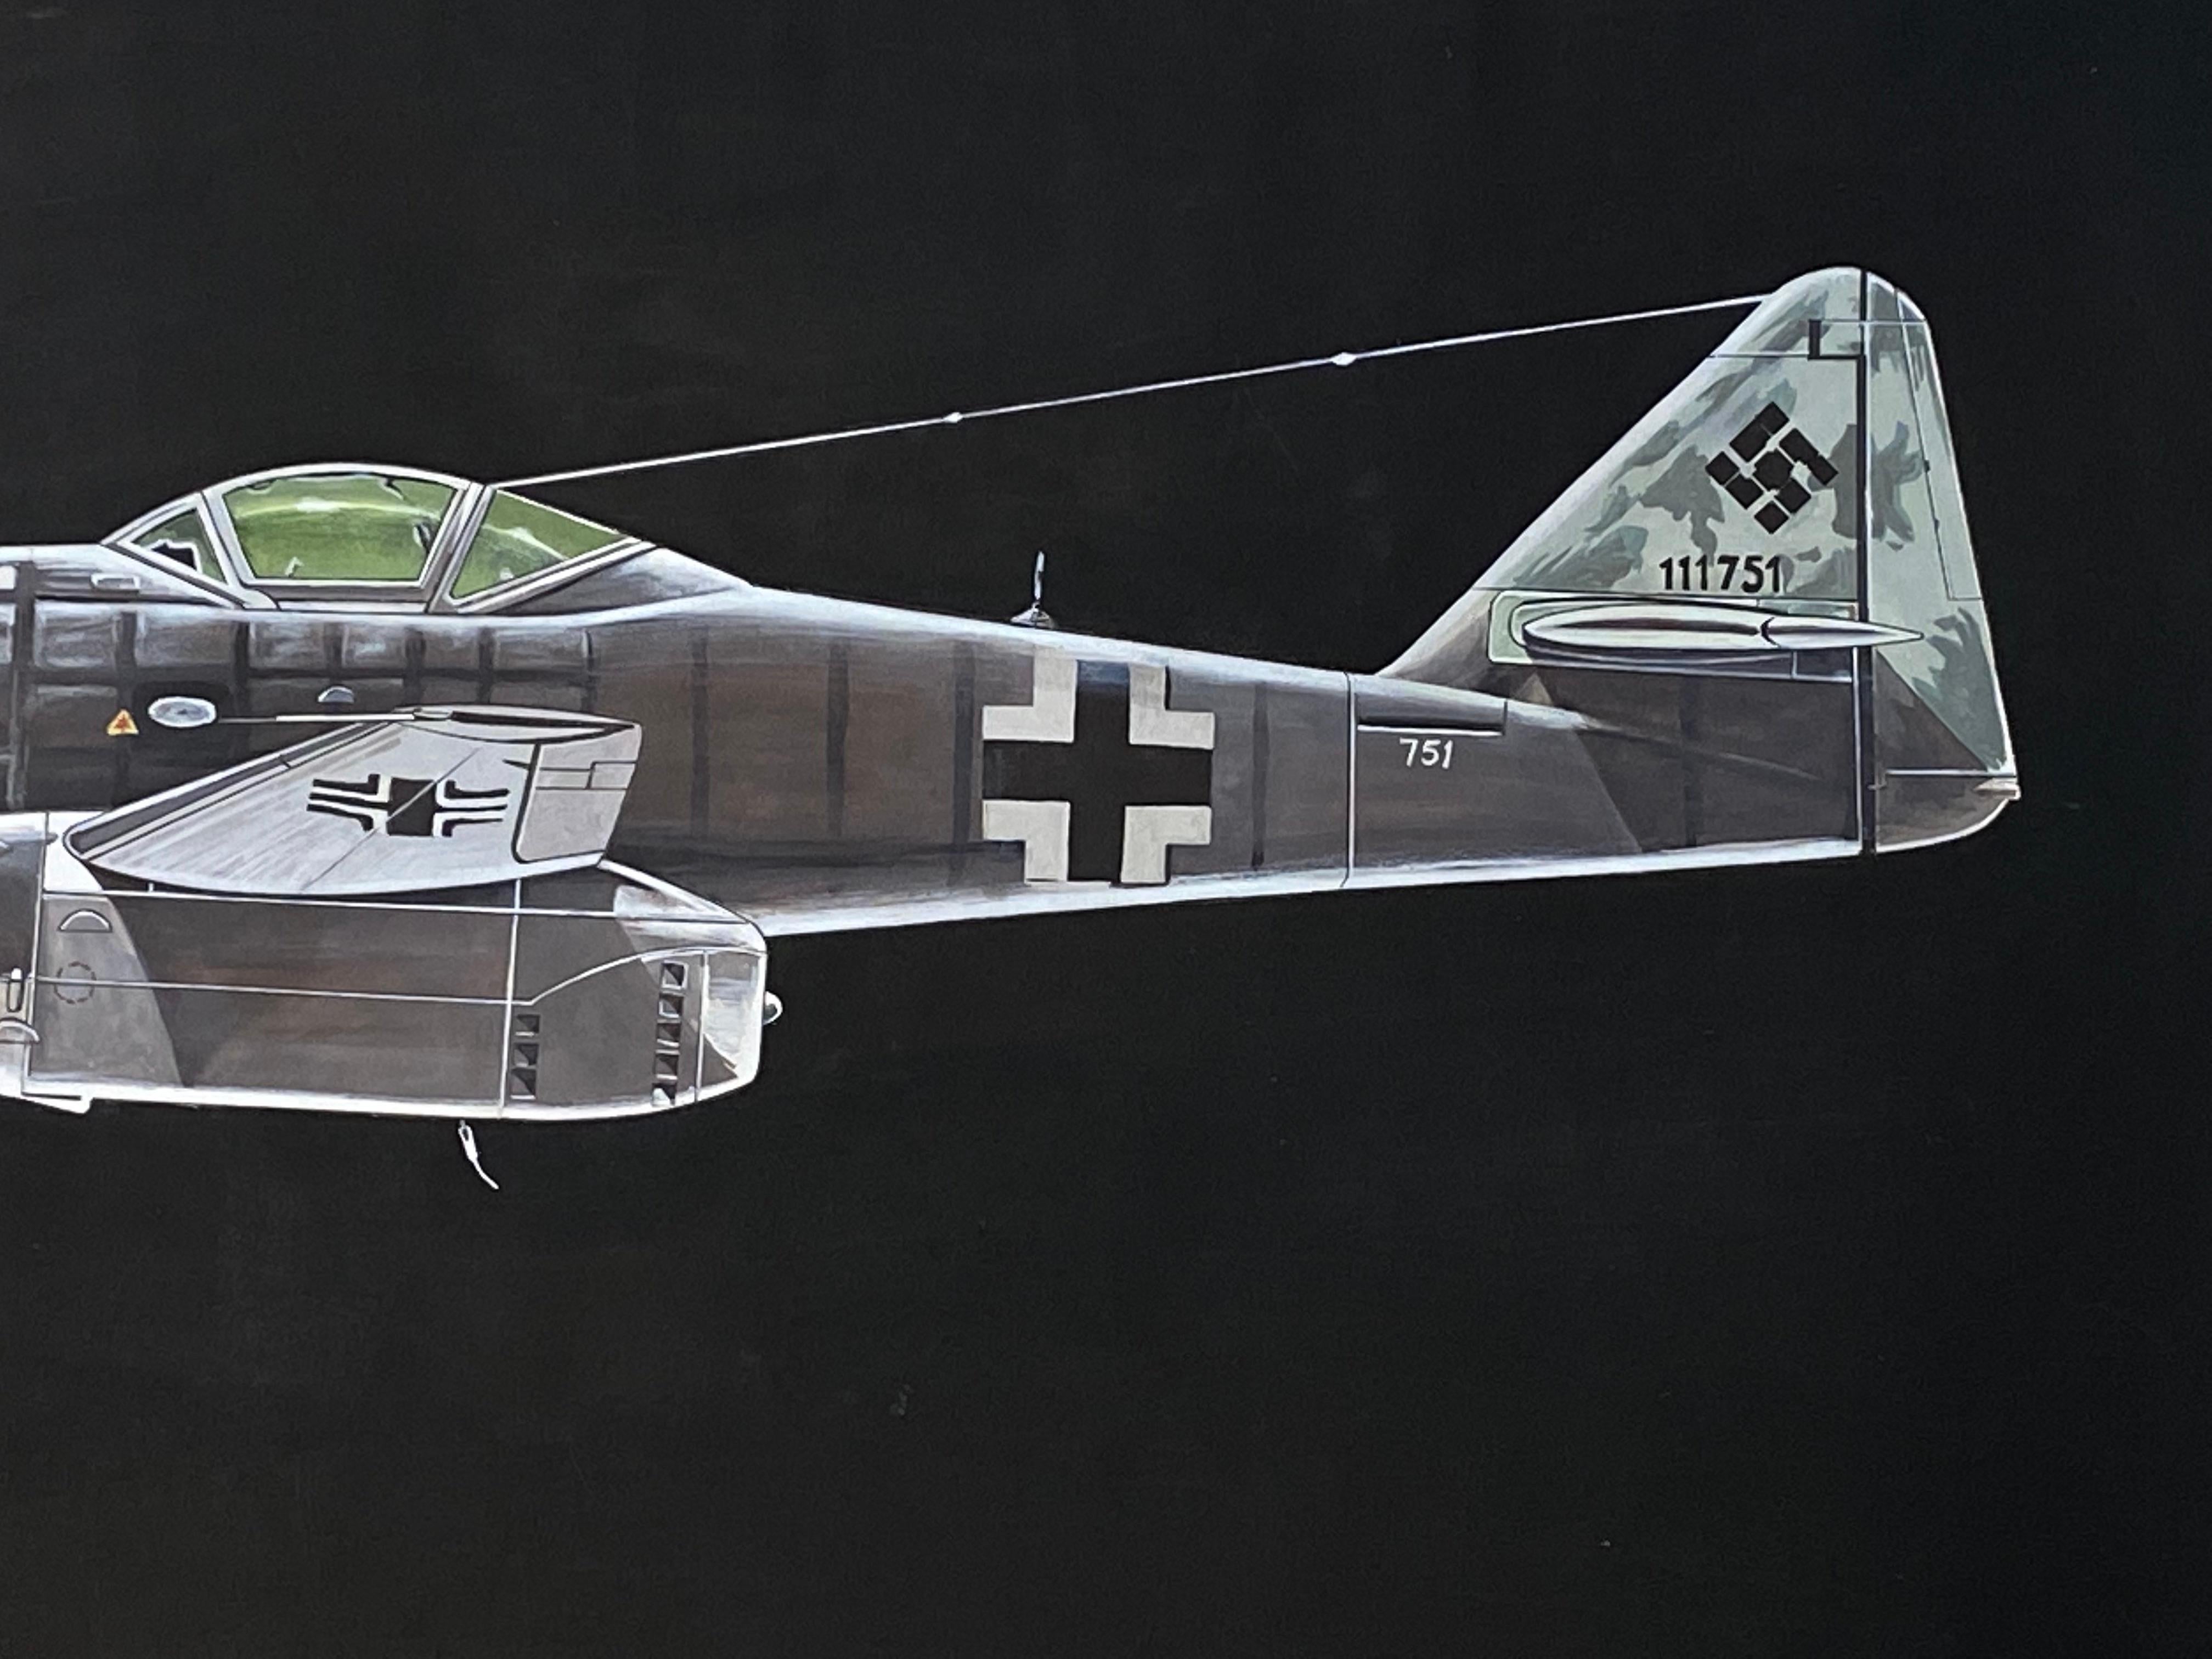 Original painting by Jean Marcel Cuny
Messerschmitt Me 262 aircraft 
Not signed 
Annotation on the back in pencil
Estate 1998
Centennial exhibition of aviation at the Champs Elysées 
September 14, 1998 
Circa : 1978 
Size : 54,4 x 79,9 cm